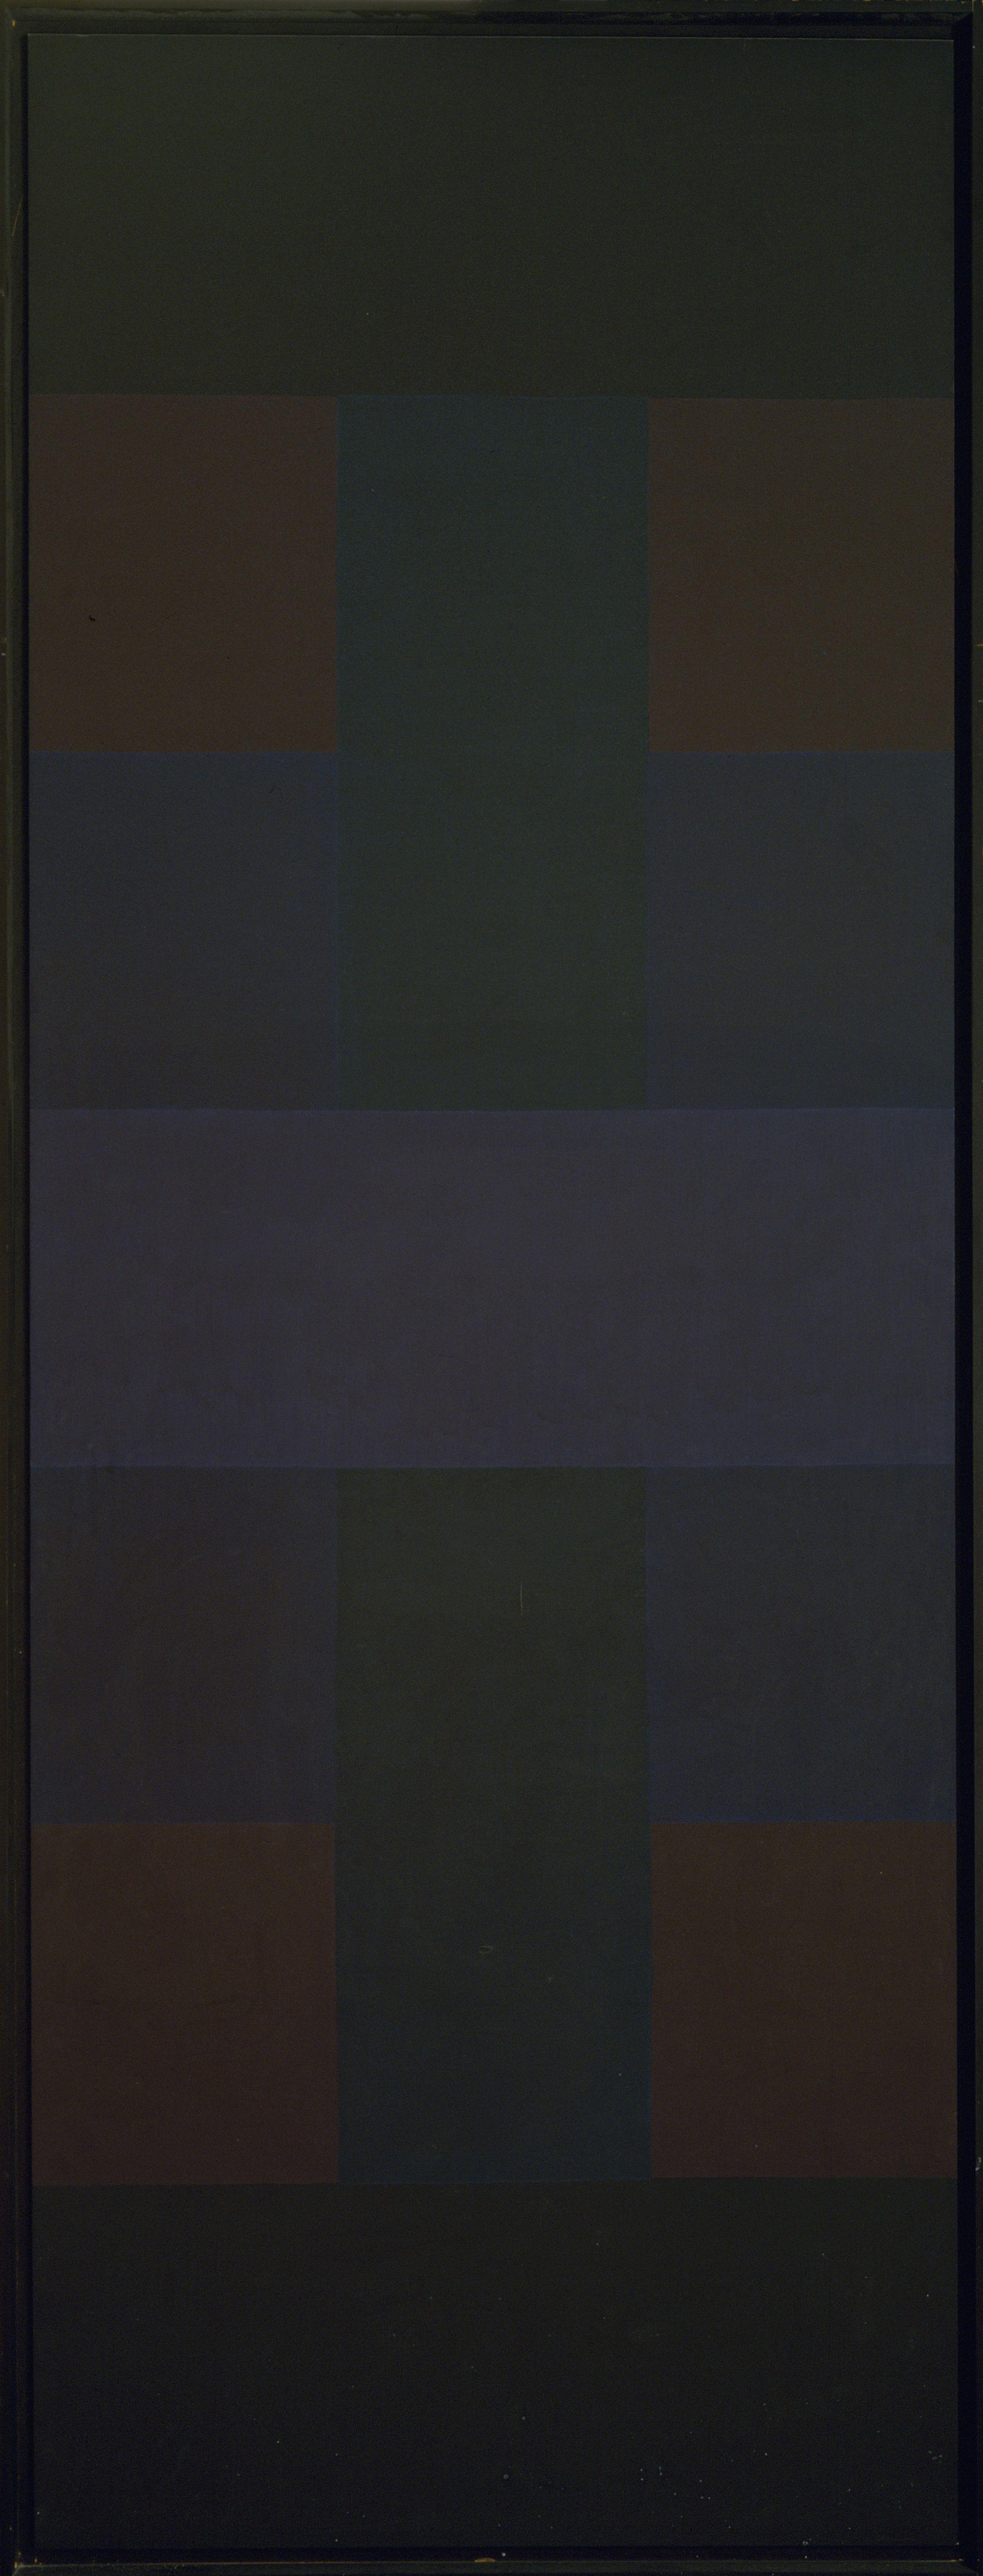 Ad Reinhardt. Abstract Painting. c. 1966